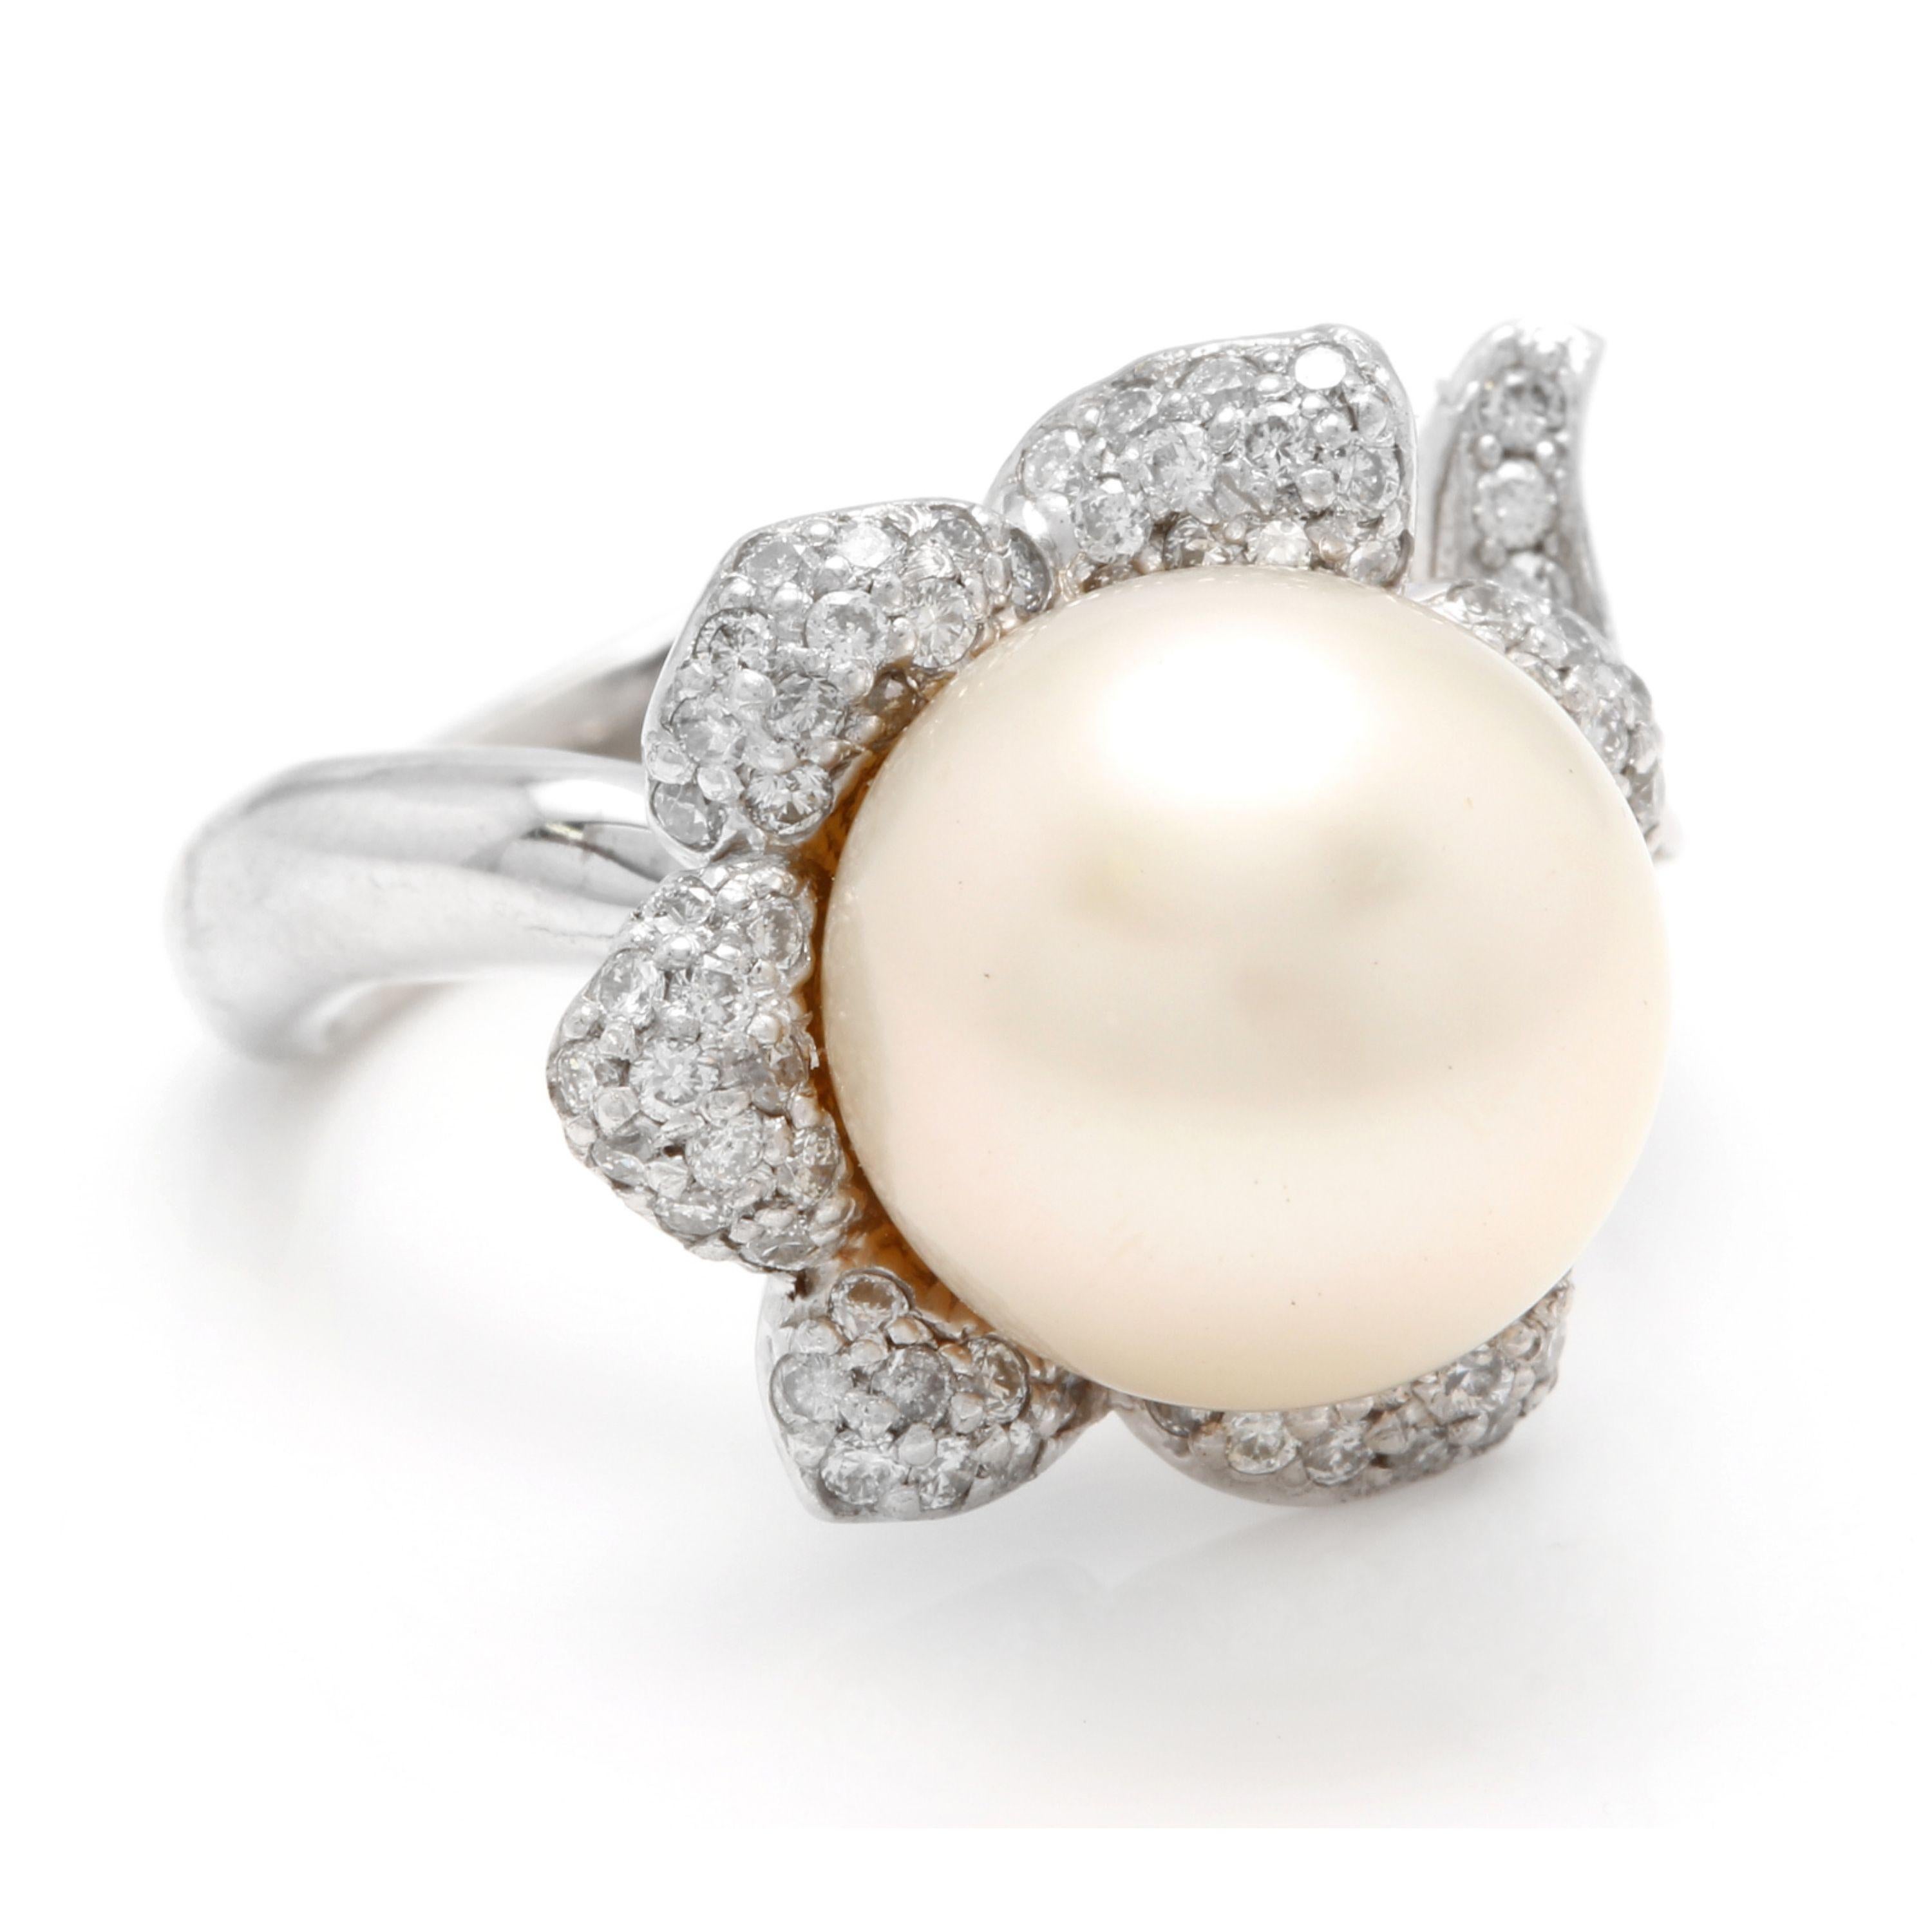 Splendid Natural South Sea Pearl and Diamond 14K Solid White Gold Ring

Stamped: 14K

Total Natural Pearl Measures: Approx. 11.20mm

Total Natural Round Diamonds Weight: Approx. 0.65 Carats (color G-H / Clarity SI1-Si2)

Ring size: 7 (we offer free